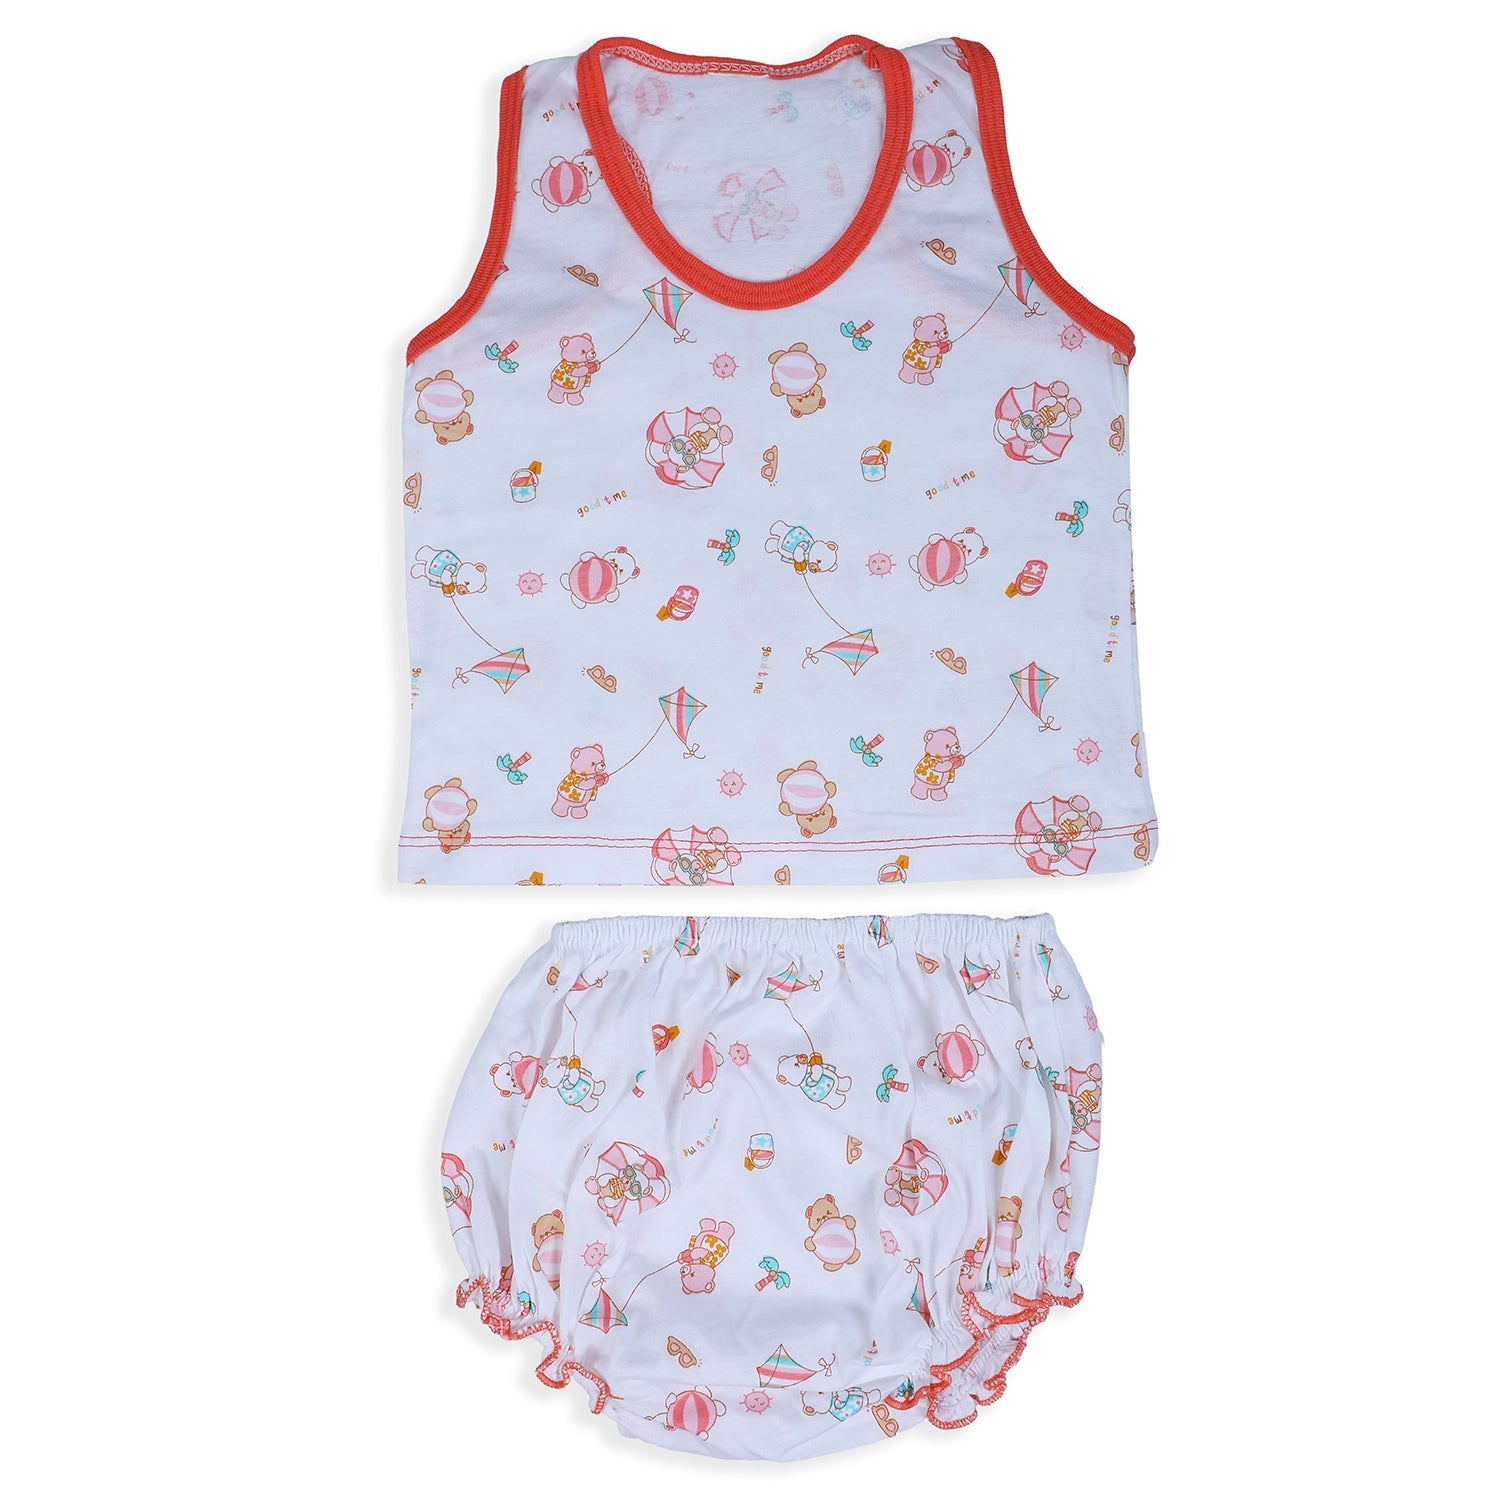 Baby Moo Kite Flying Bear Pure Cotton Sleeveless Vest With Matching Bottom 2pcs Set - Red - Baby Moo